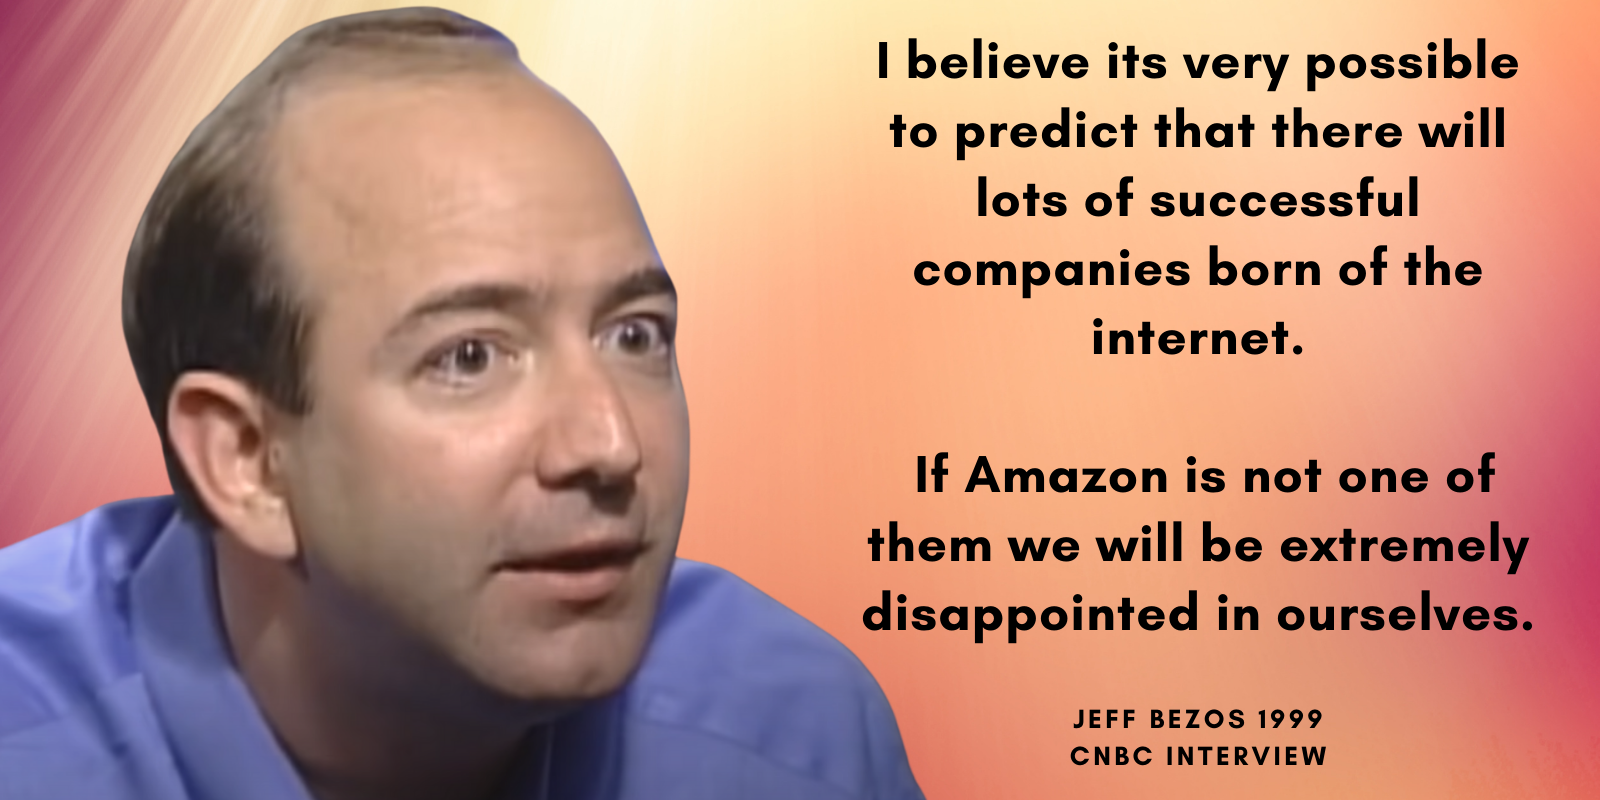 “I believe its very possible to predict that there will lots of successful companies born of the internet.” Jeff Bezos